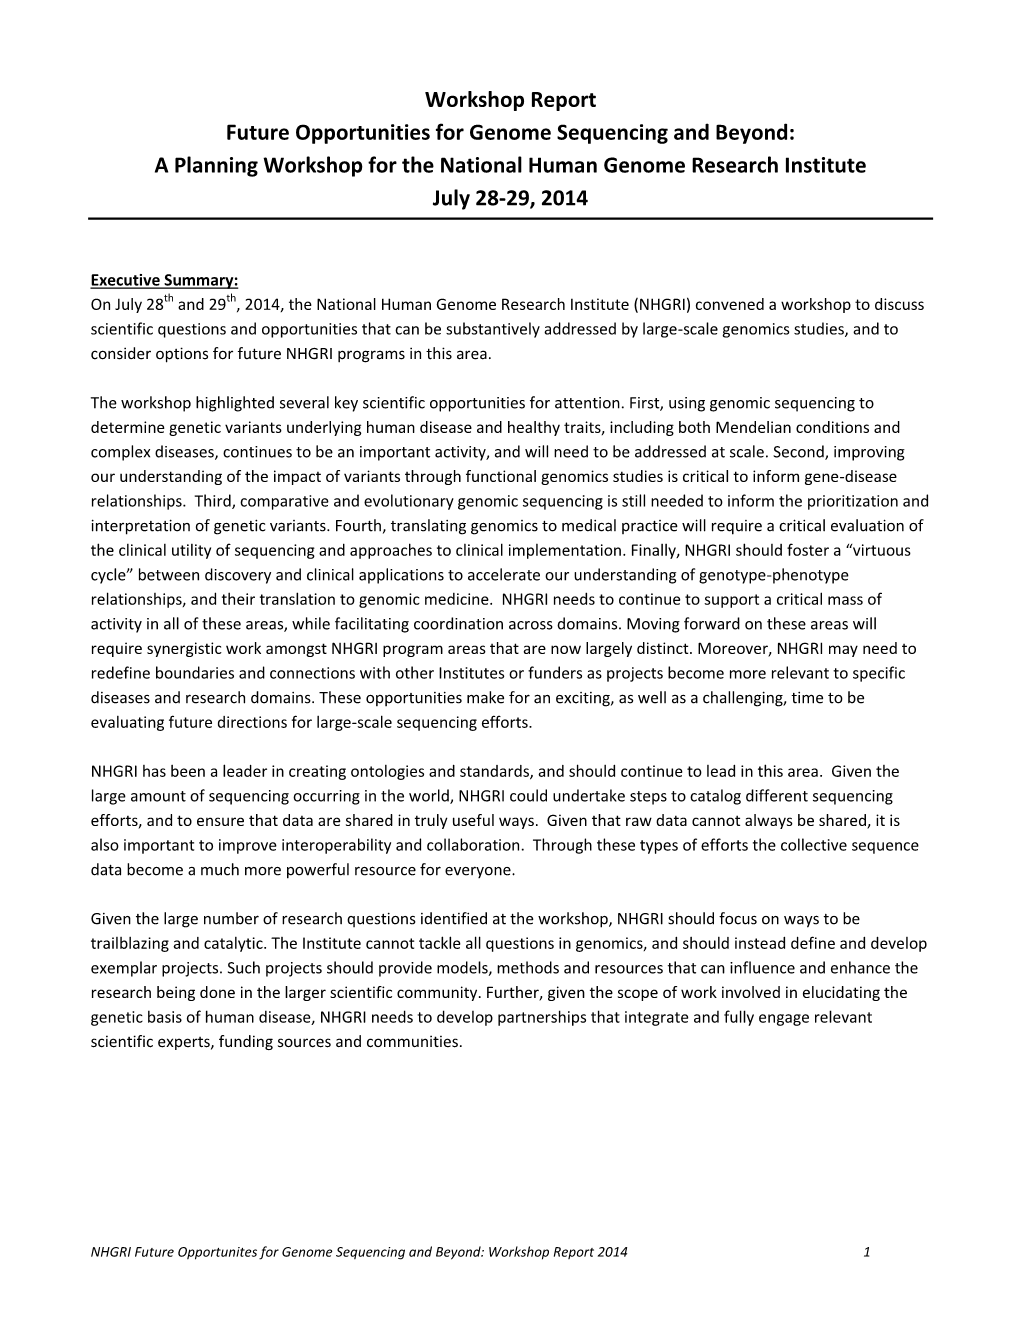 Workshop Report Future Opportunities for Genome Sequencing and Beyond: a Planning Workshop for the National Human Genome Research Institute July 28-29, 2014